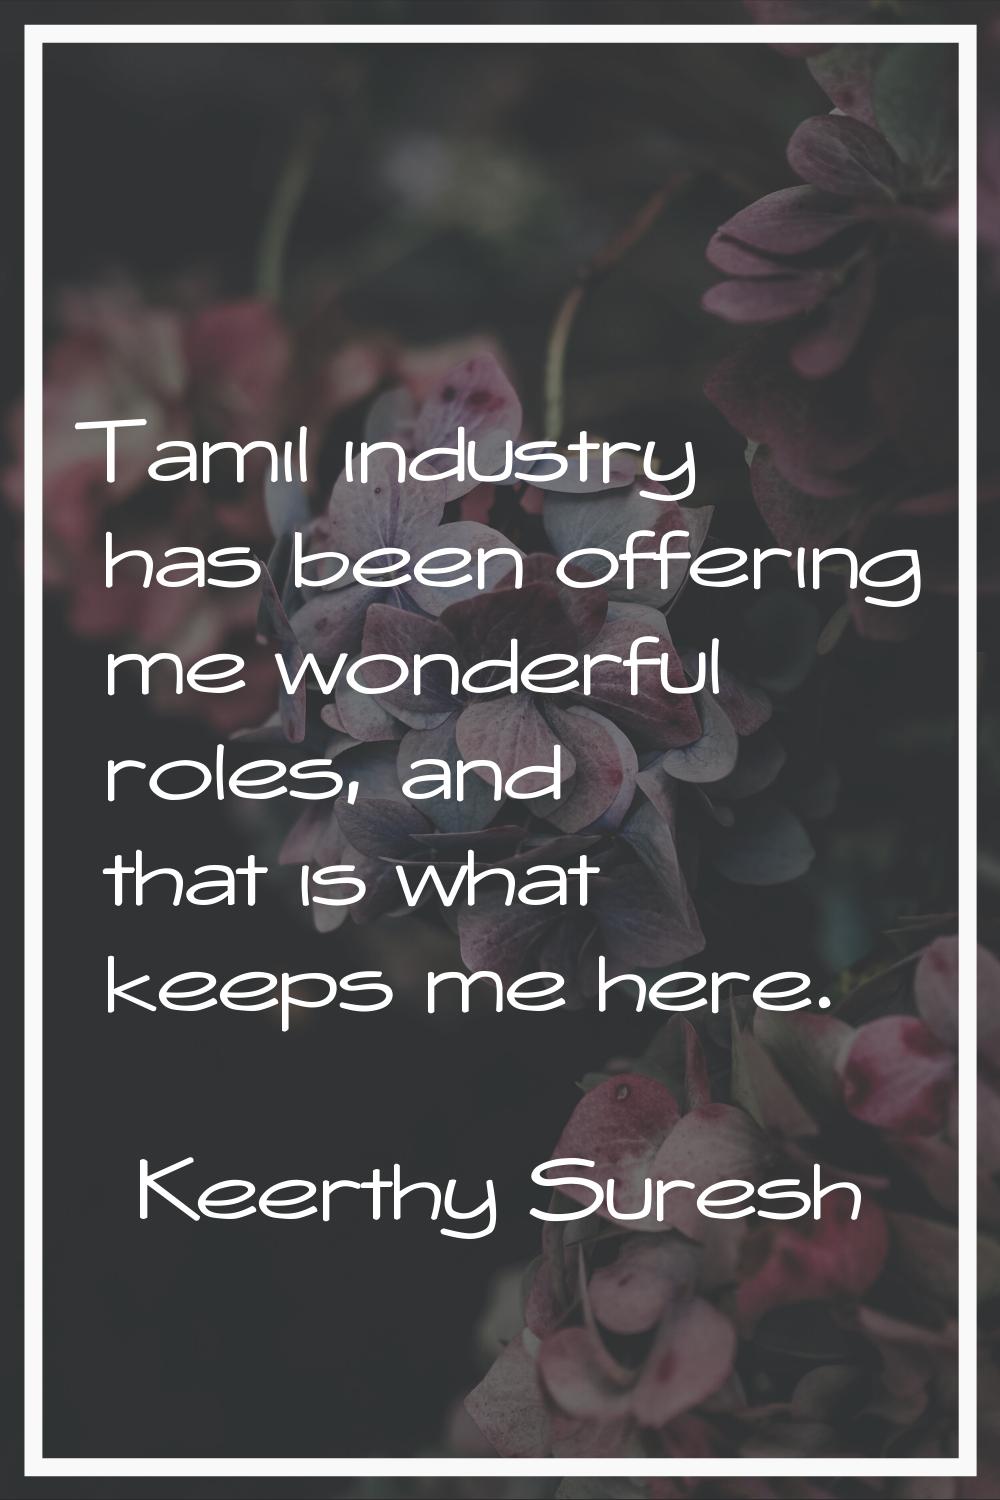 Tamil industry has been offering me wonderful roles, and that is what keeps me here.